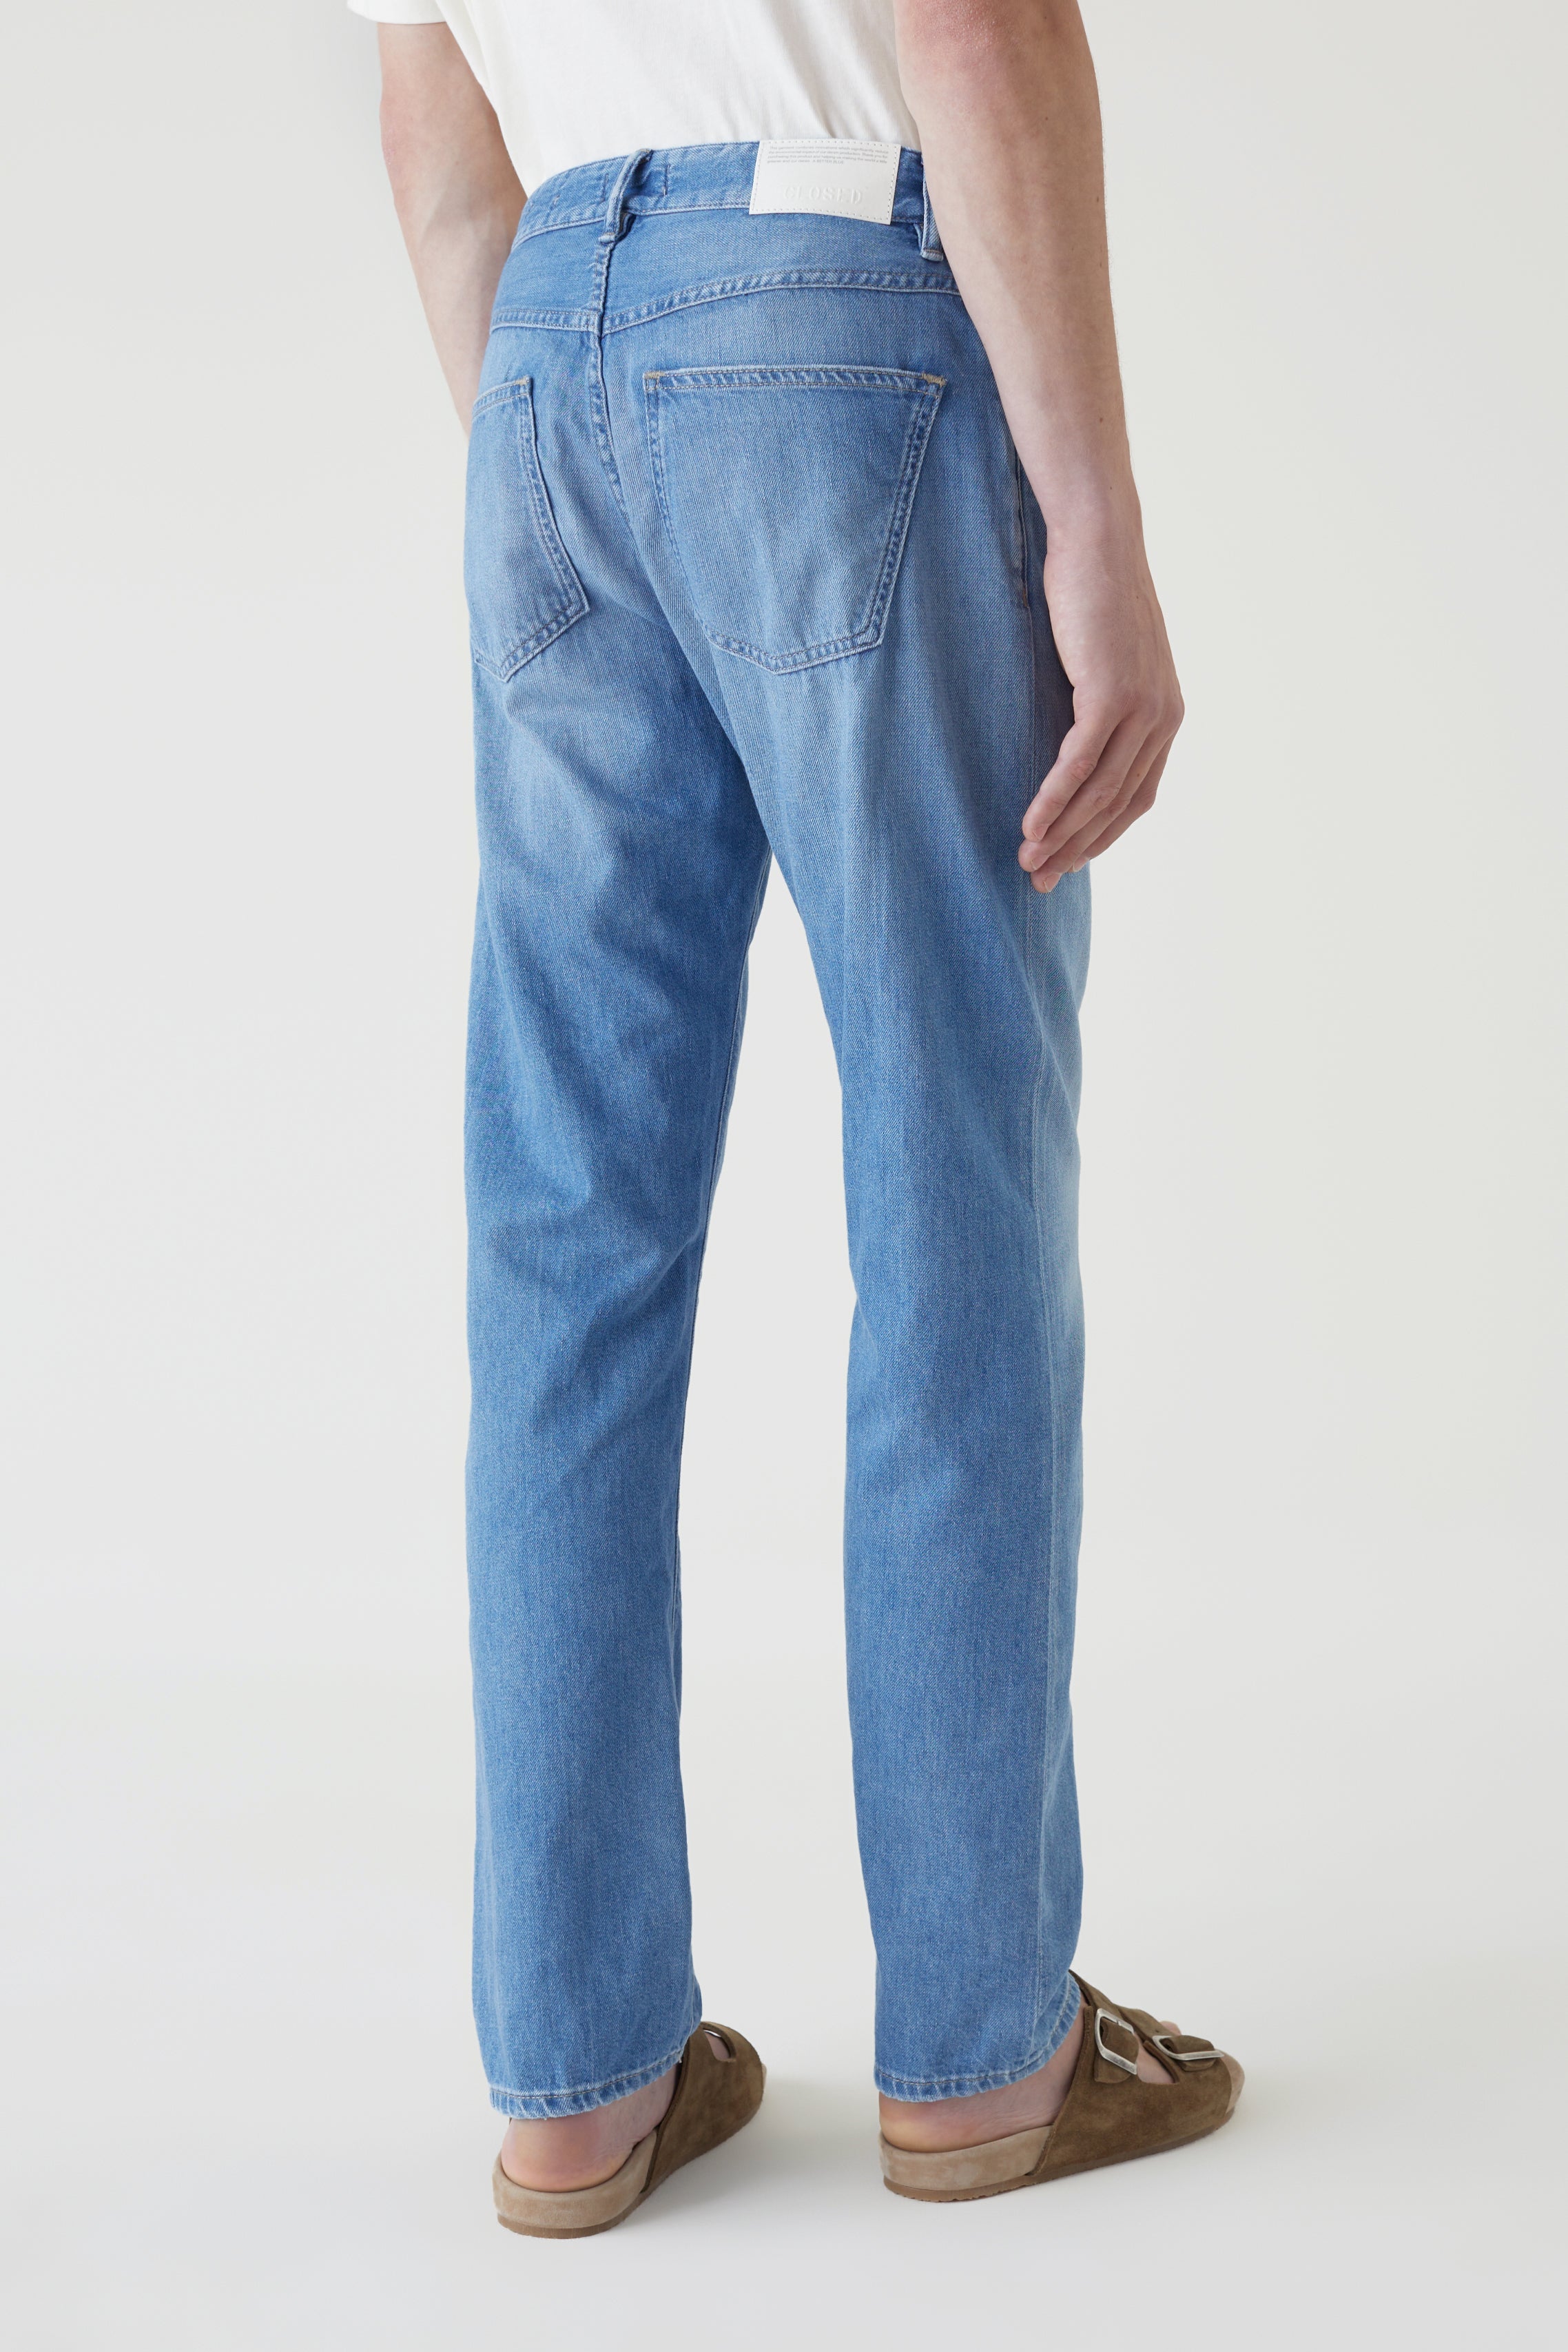 CLOSED-OUTLET-SALE-STYLE-NAME-OAKLAND-STRAIGHT-JEANS-Hosen-ARCHIVE-COLLECTION-3_2cf54d71-2012-4d33-85c7-3bdf8e12b0dc.jpg